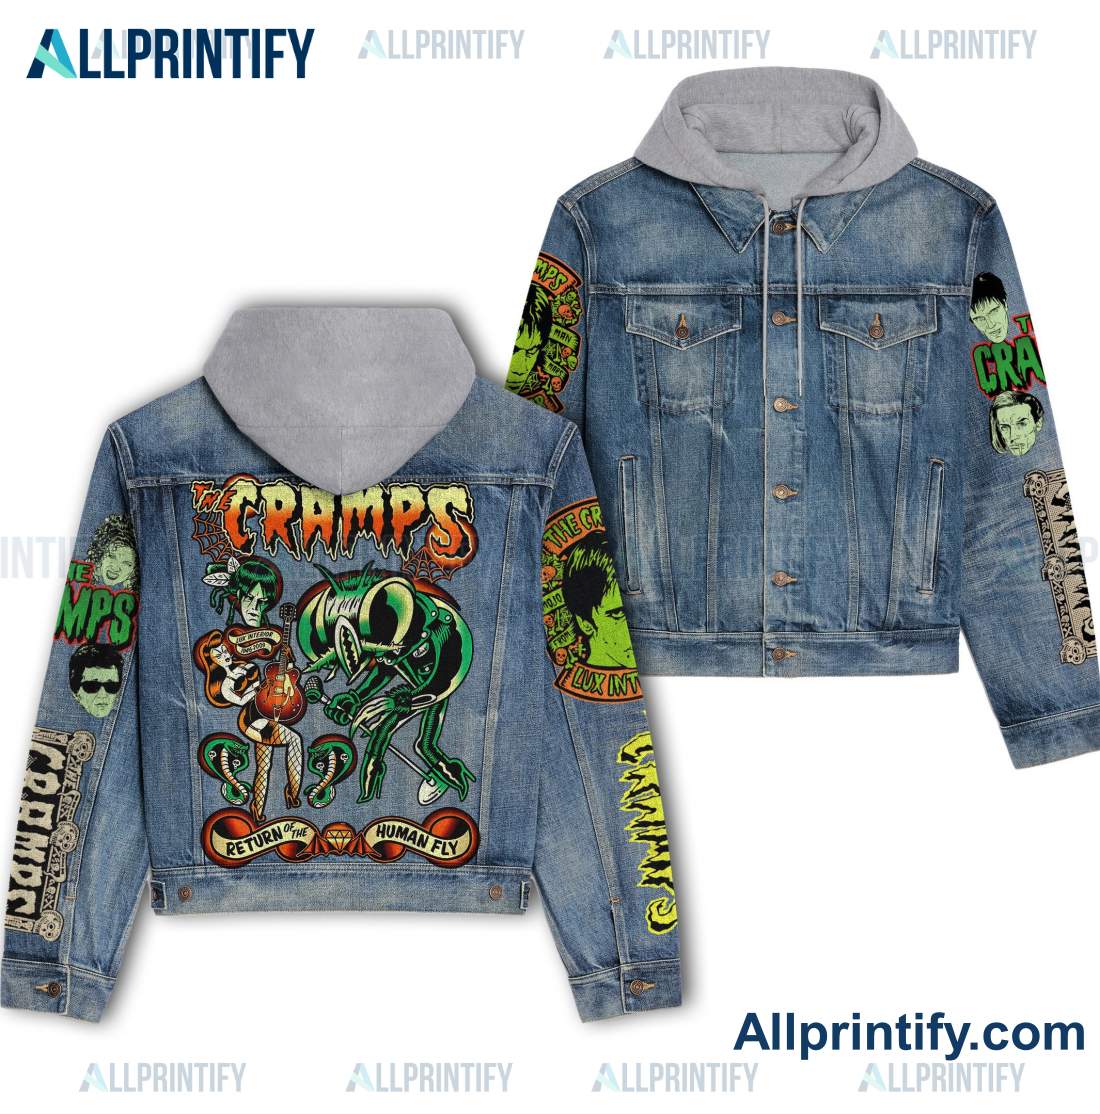 The Cramps Return Of The Human Fly Hooded Denim Jacket